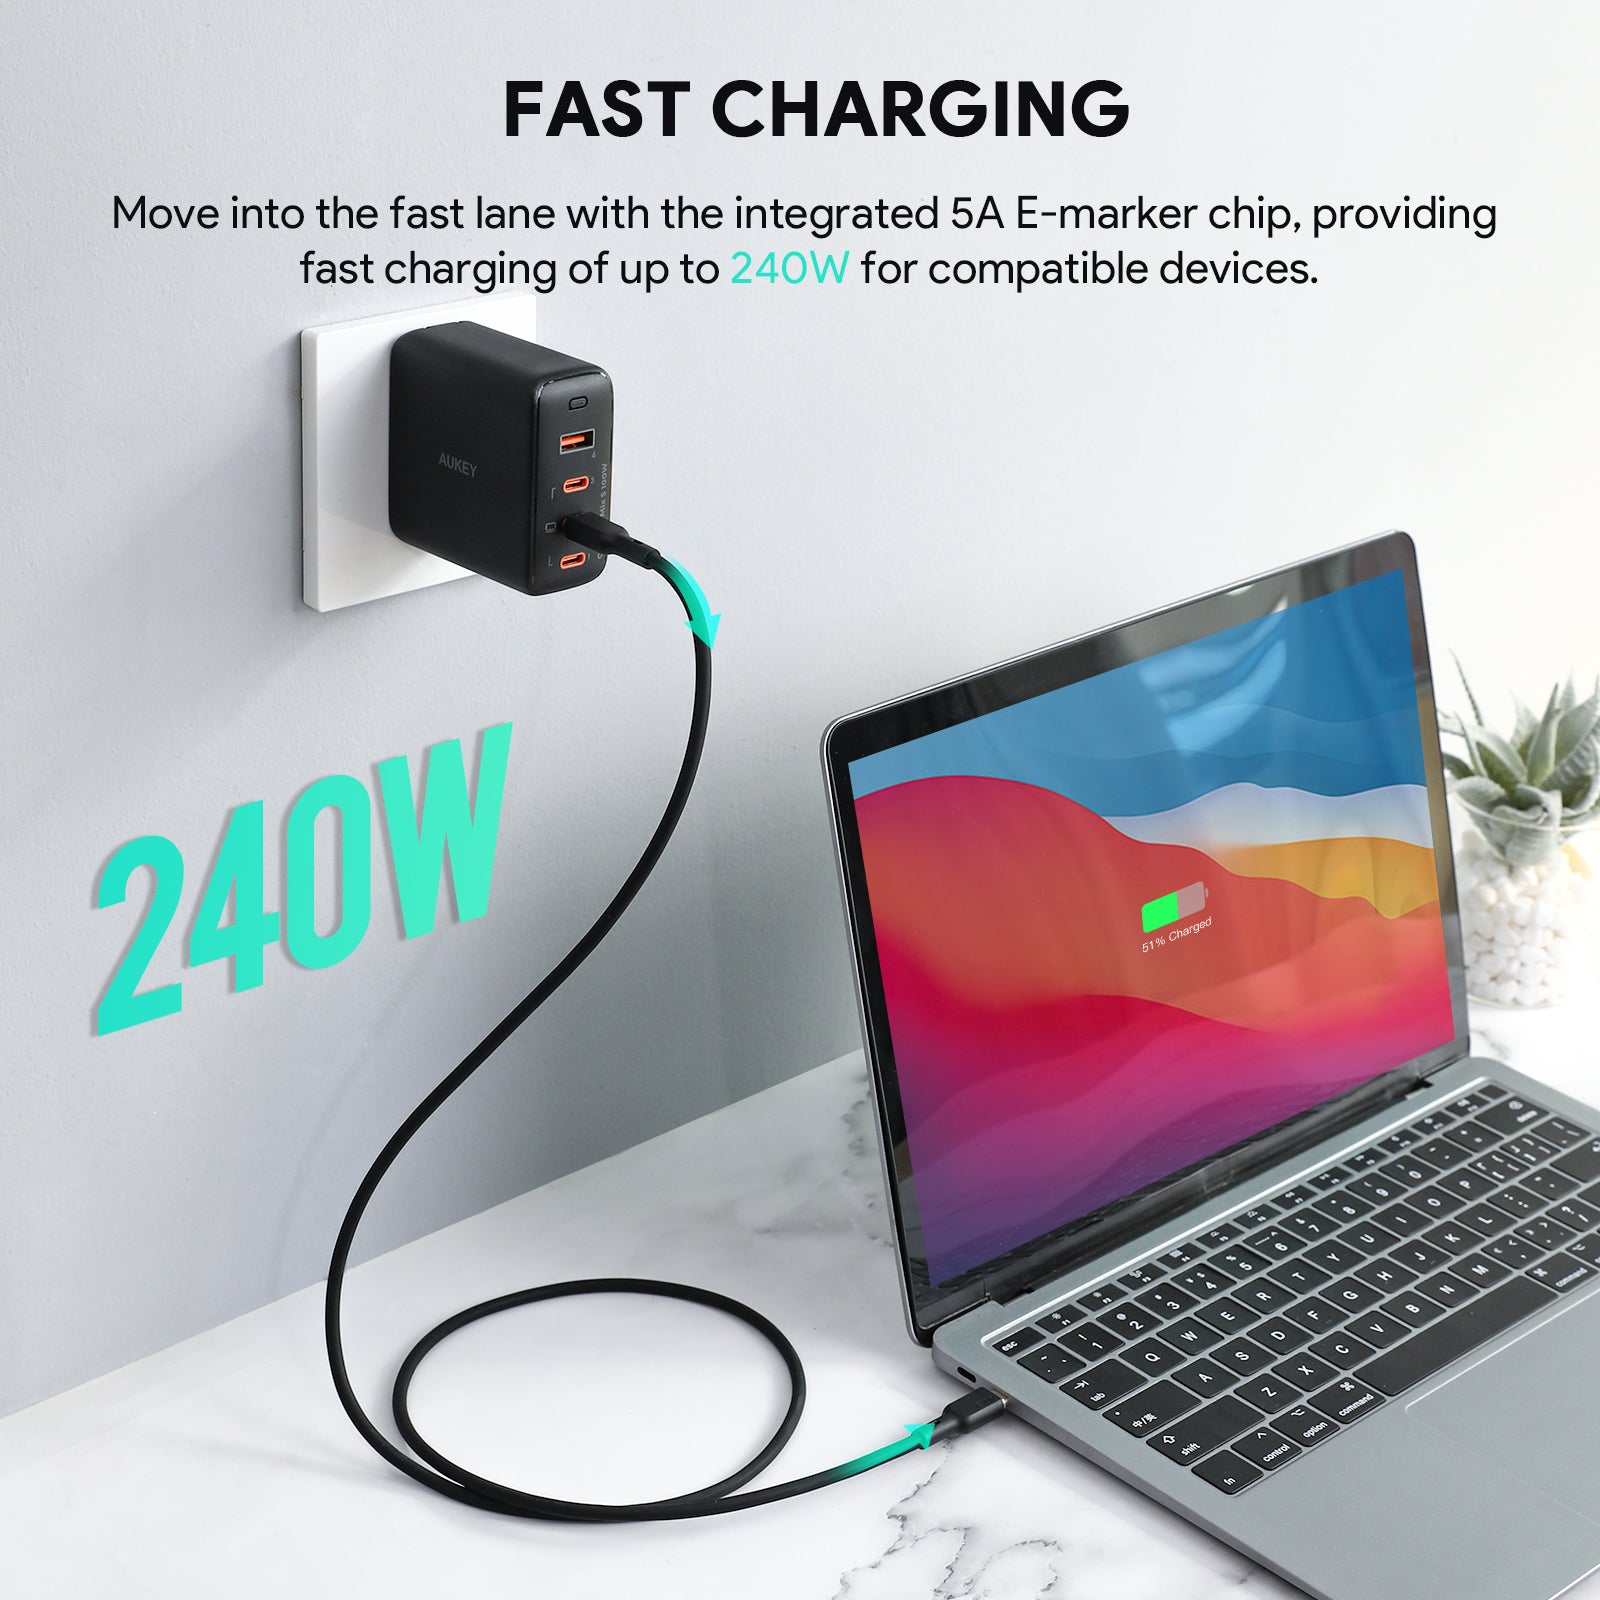 CB-SCC Circlet Blink 140W 240W Silicone USB C to USB C Cable PD Cable